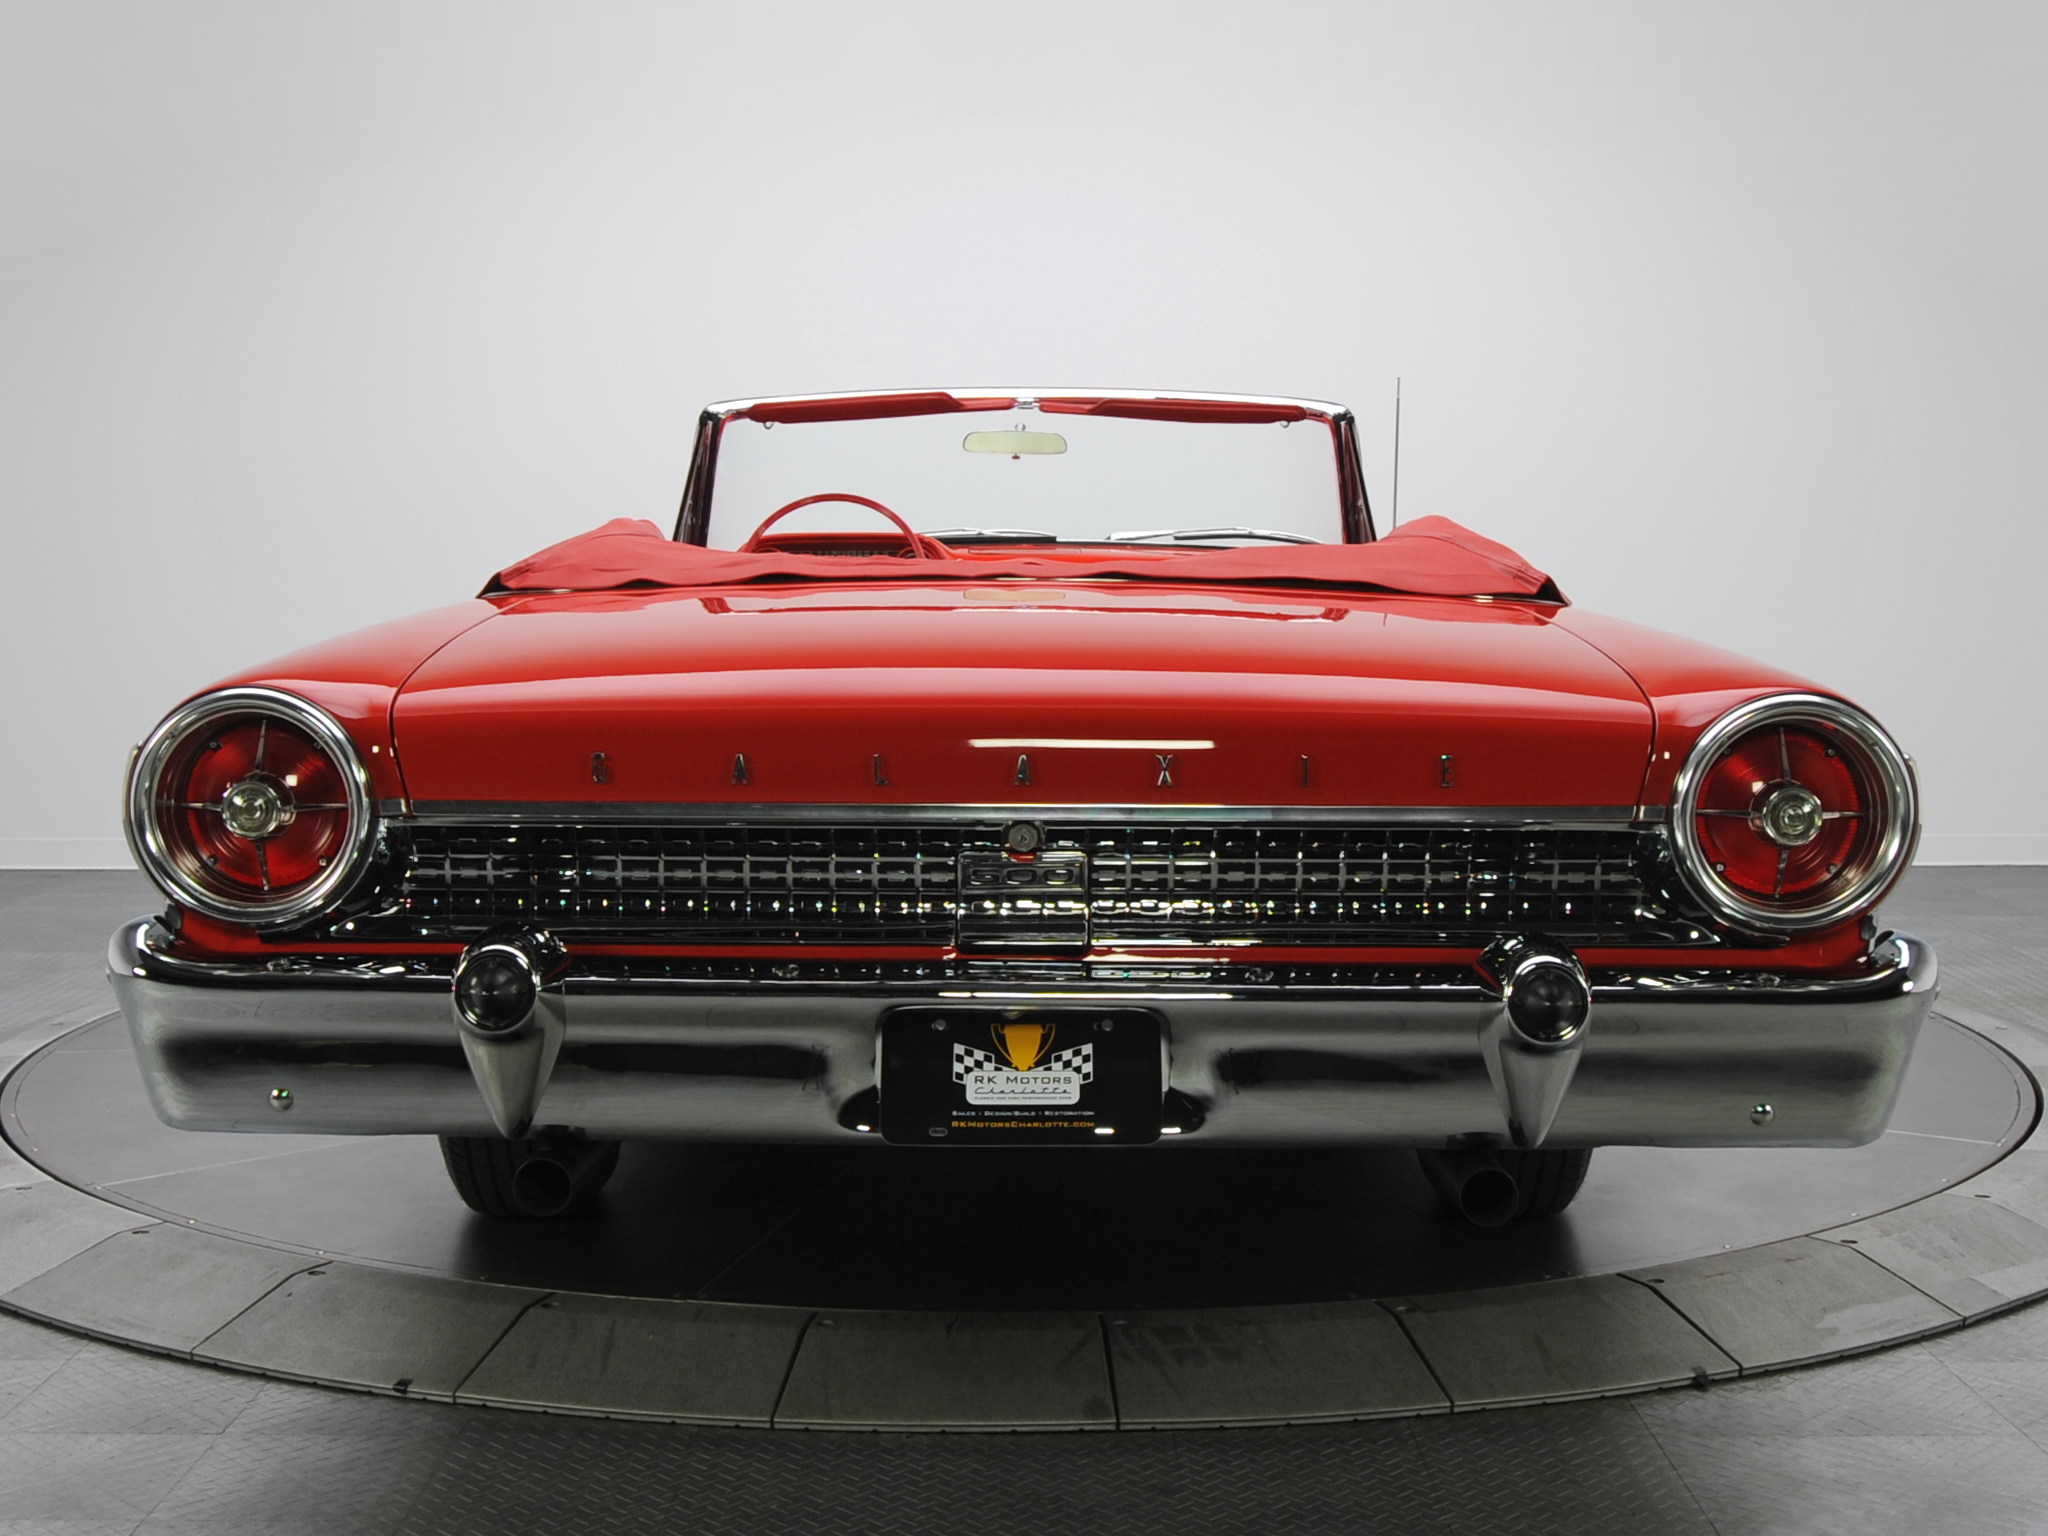 Ford Galaxie Sunliner Convertible Classic Wallpaper Background